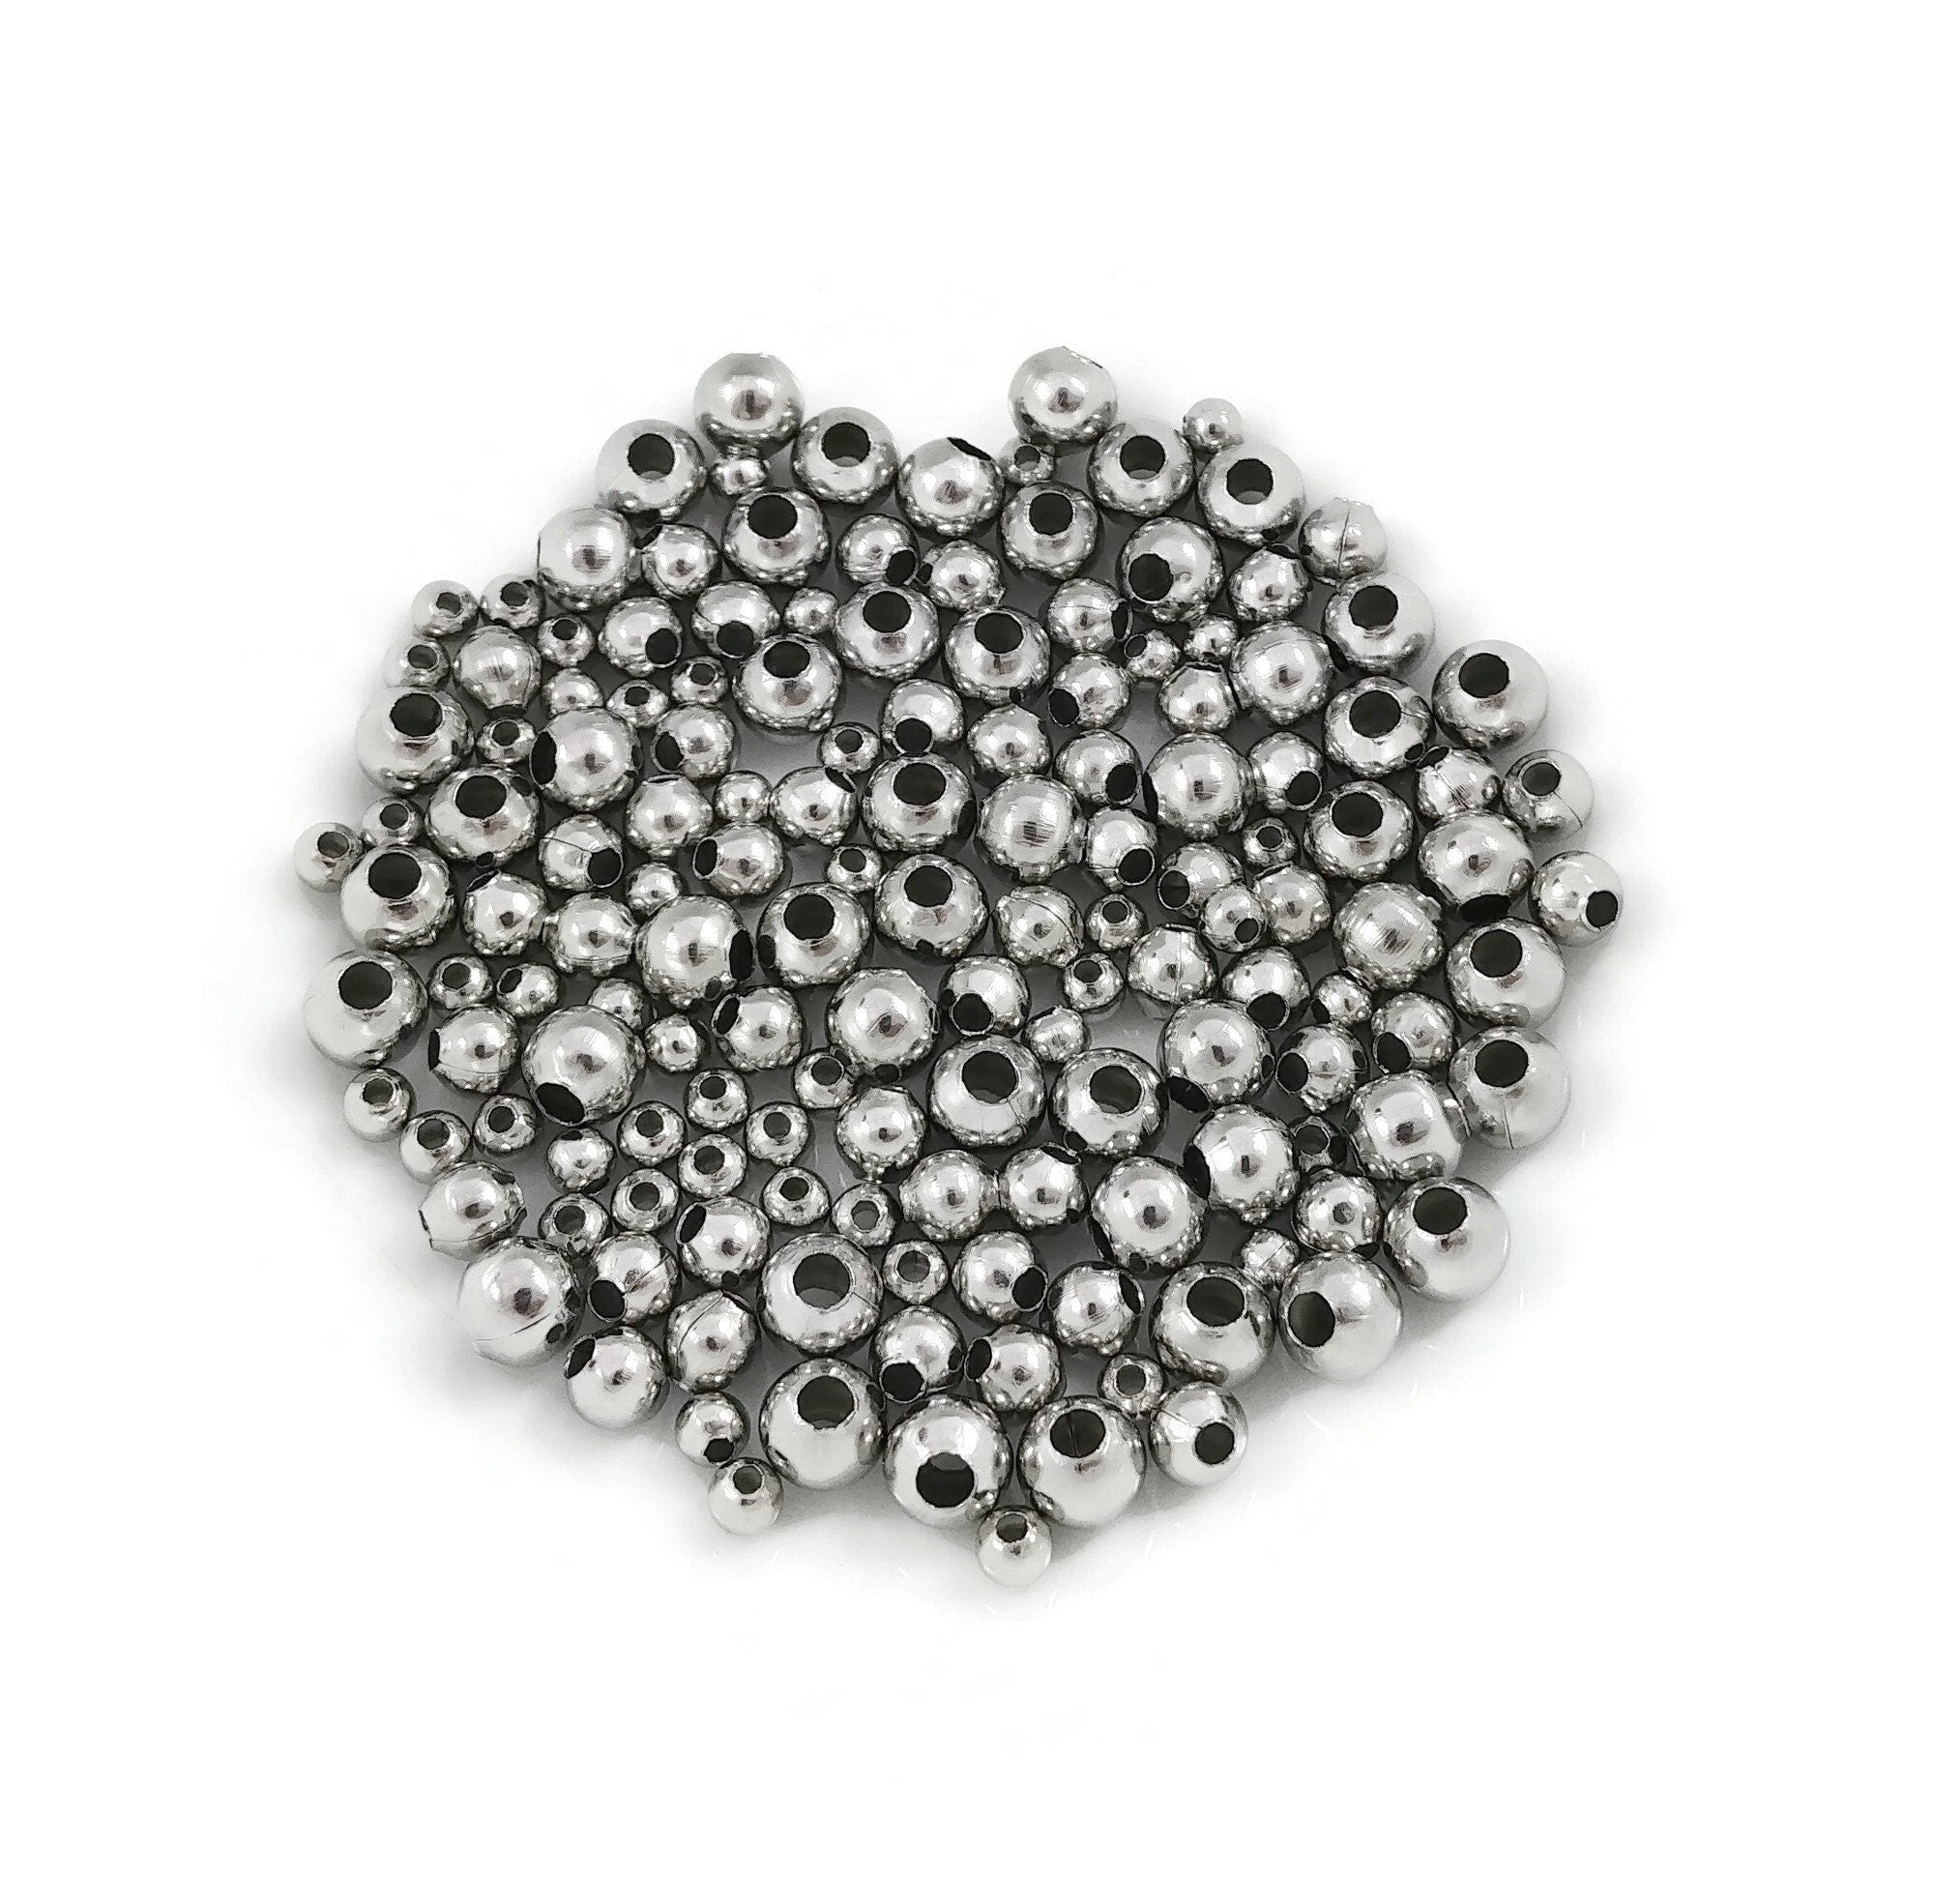 30 Tibetan Silver Dotted Ring Large Hole Spacer Beads Bulk Wholesale